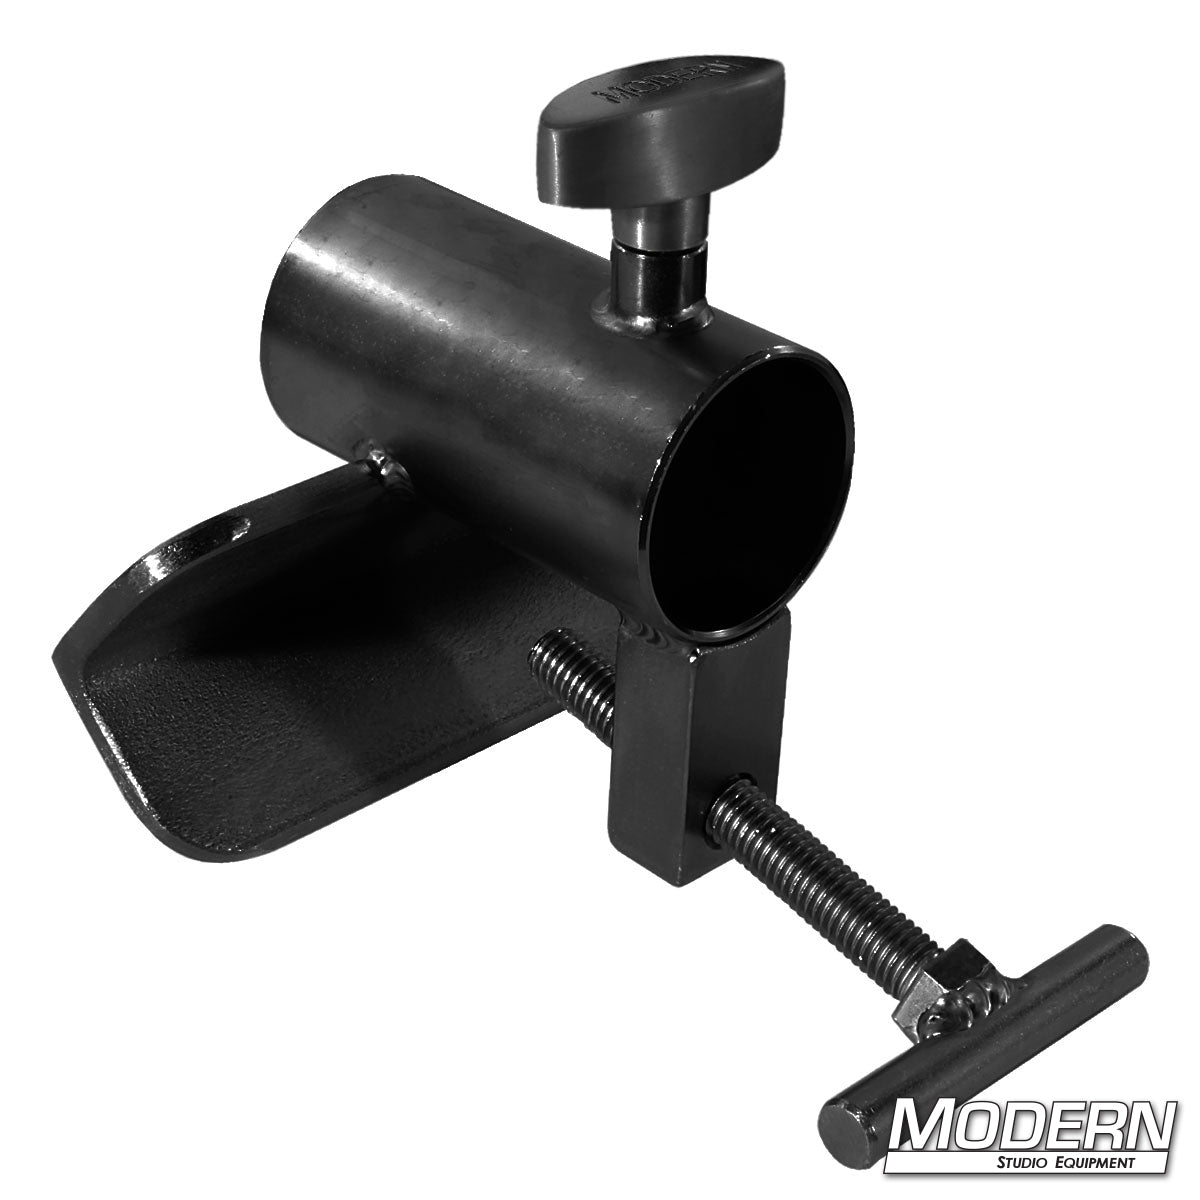 Candlestick Clamp for 1-1/2" Speed-Rail®